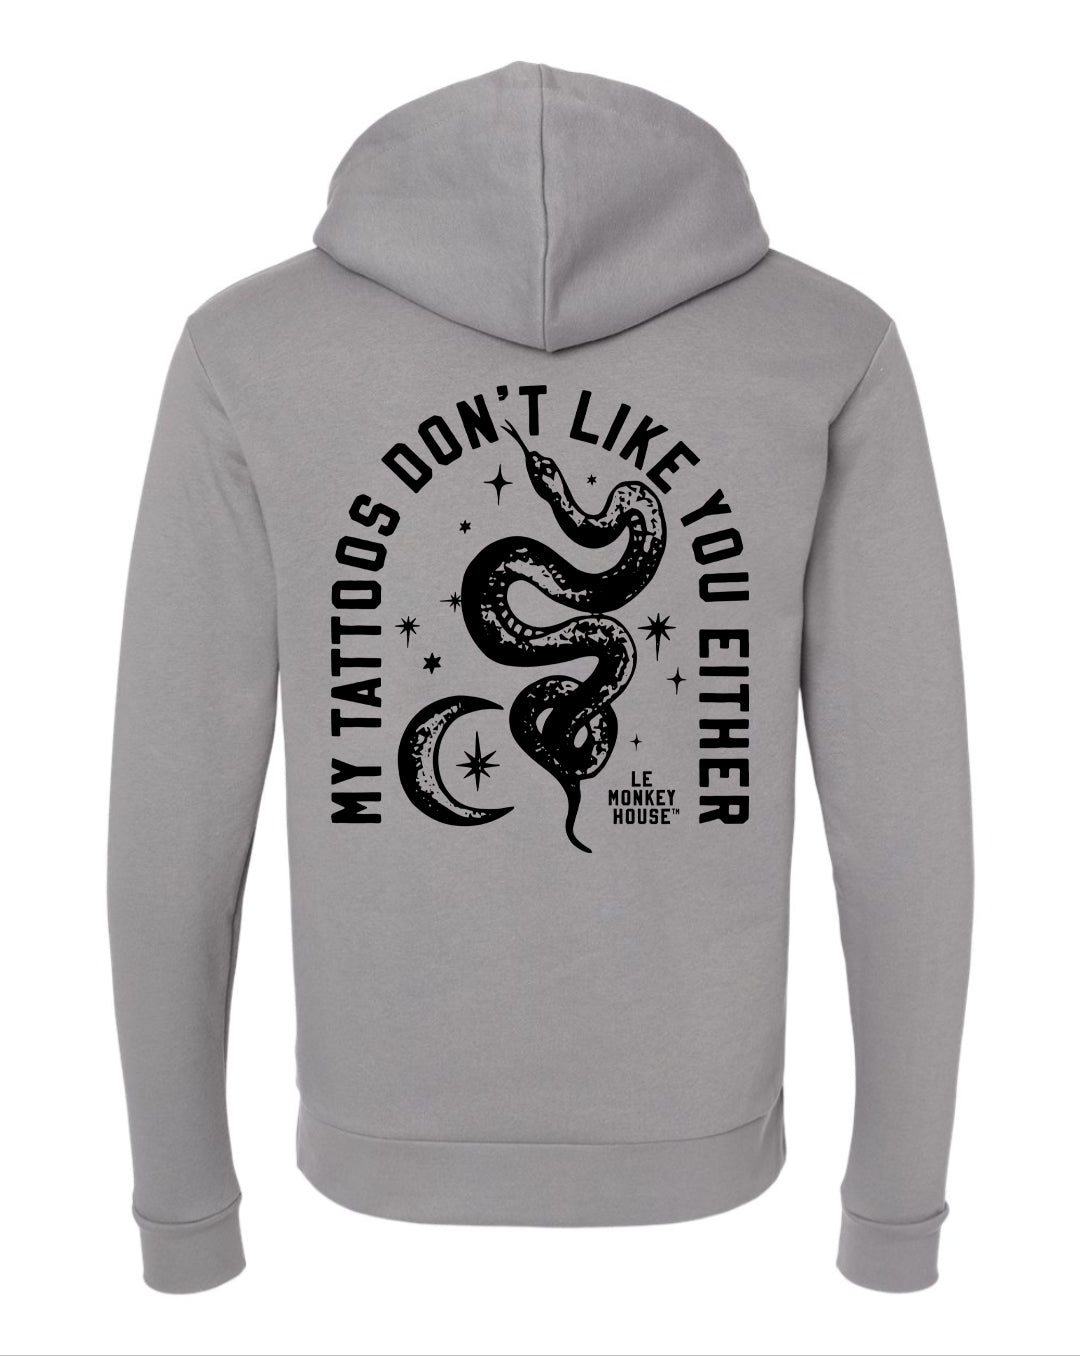 My Tattoos don't like you either Hoodie, Hooded Sweatshirt snake moon stars tattoo design by Le Monkey House